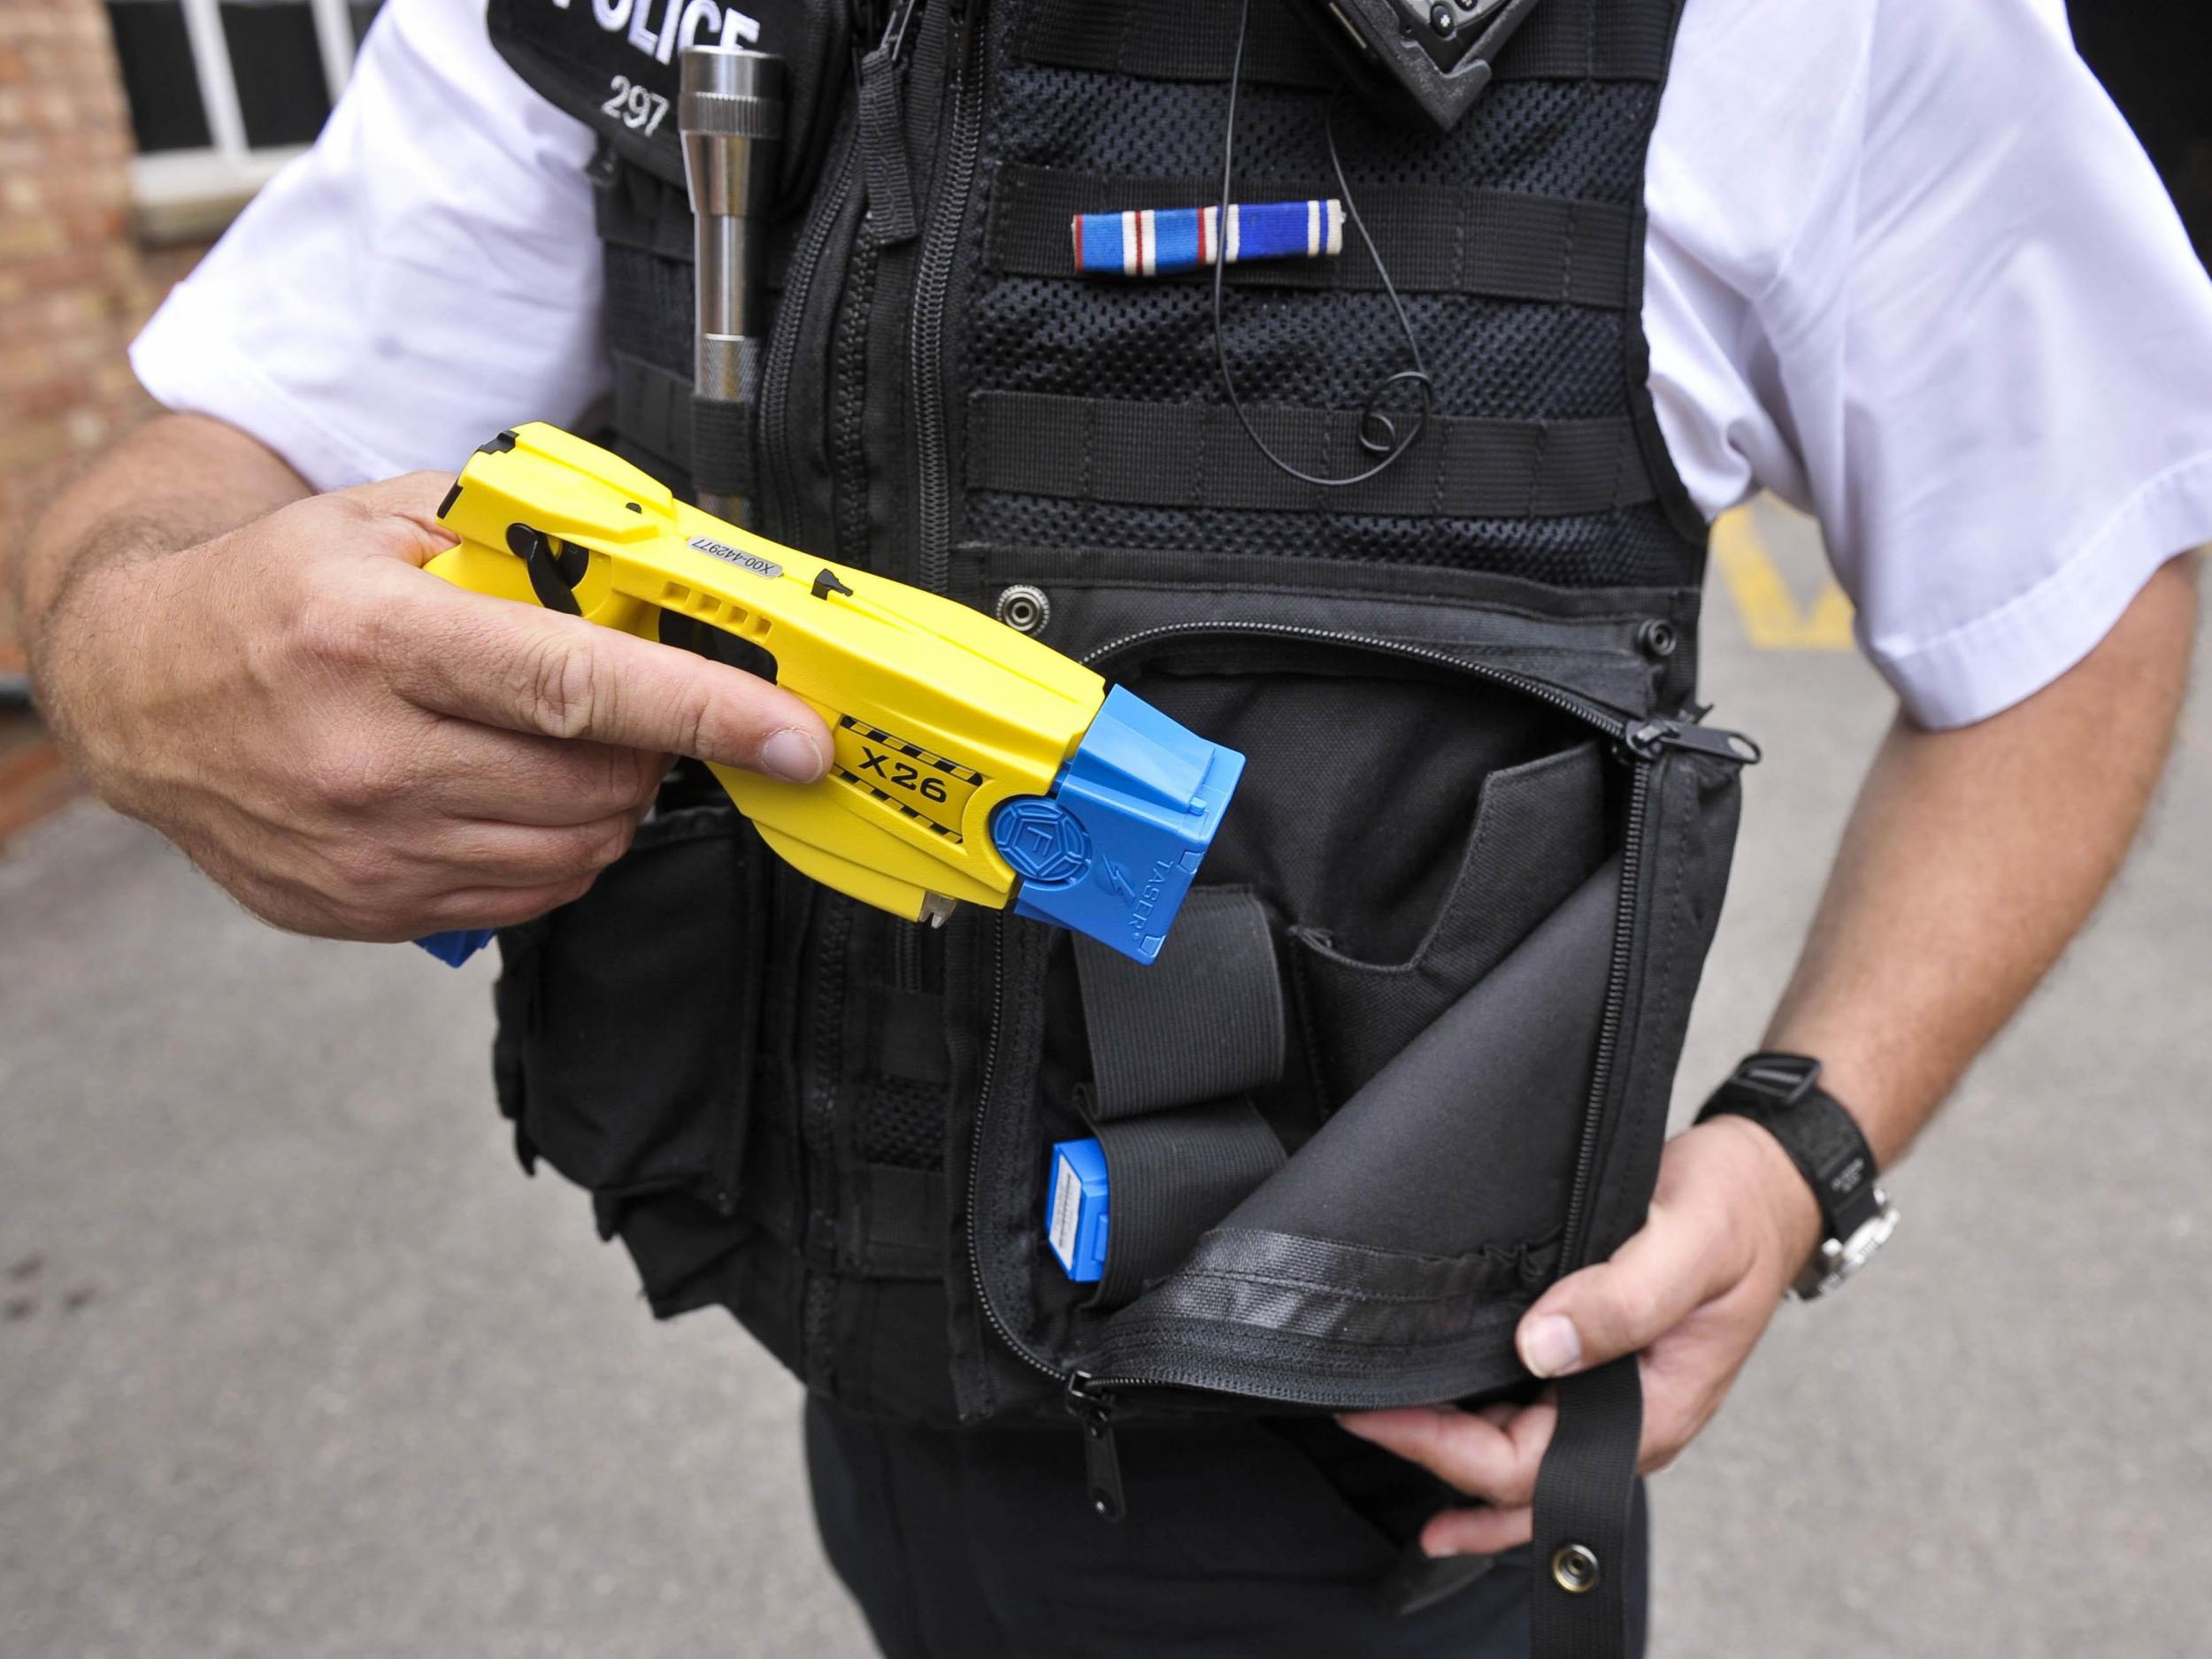 Police officers must pass training courses in order to carry Tasers